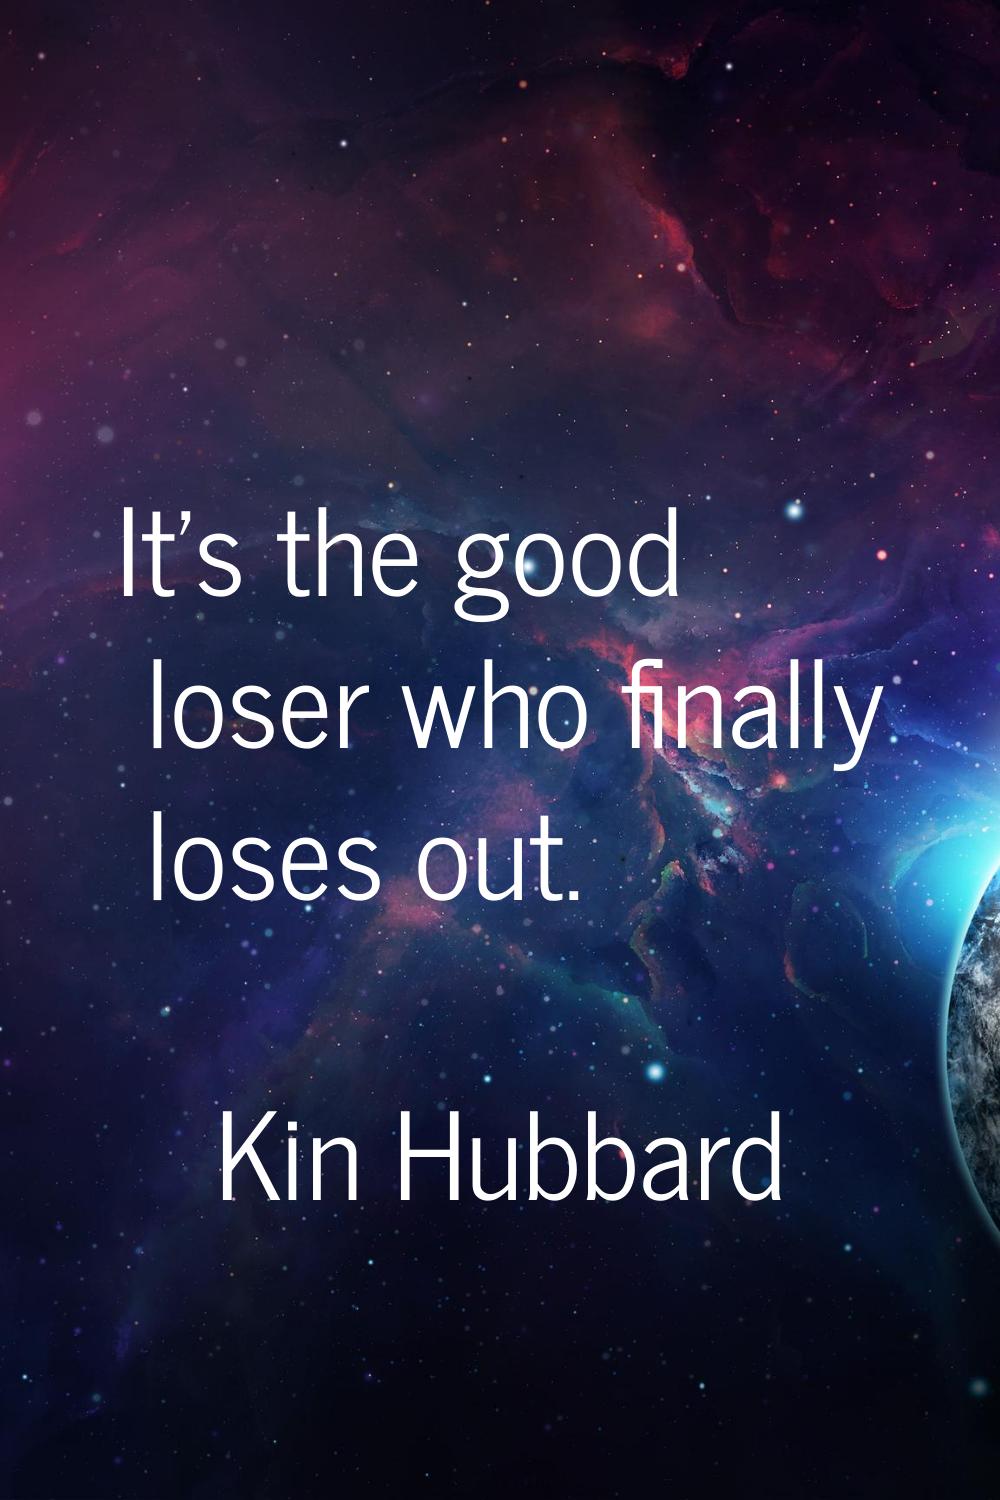 It's the good loser who finally loses out.